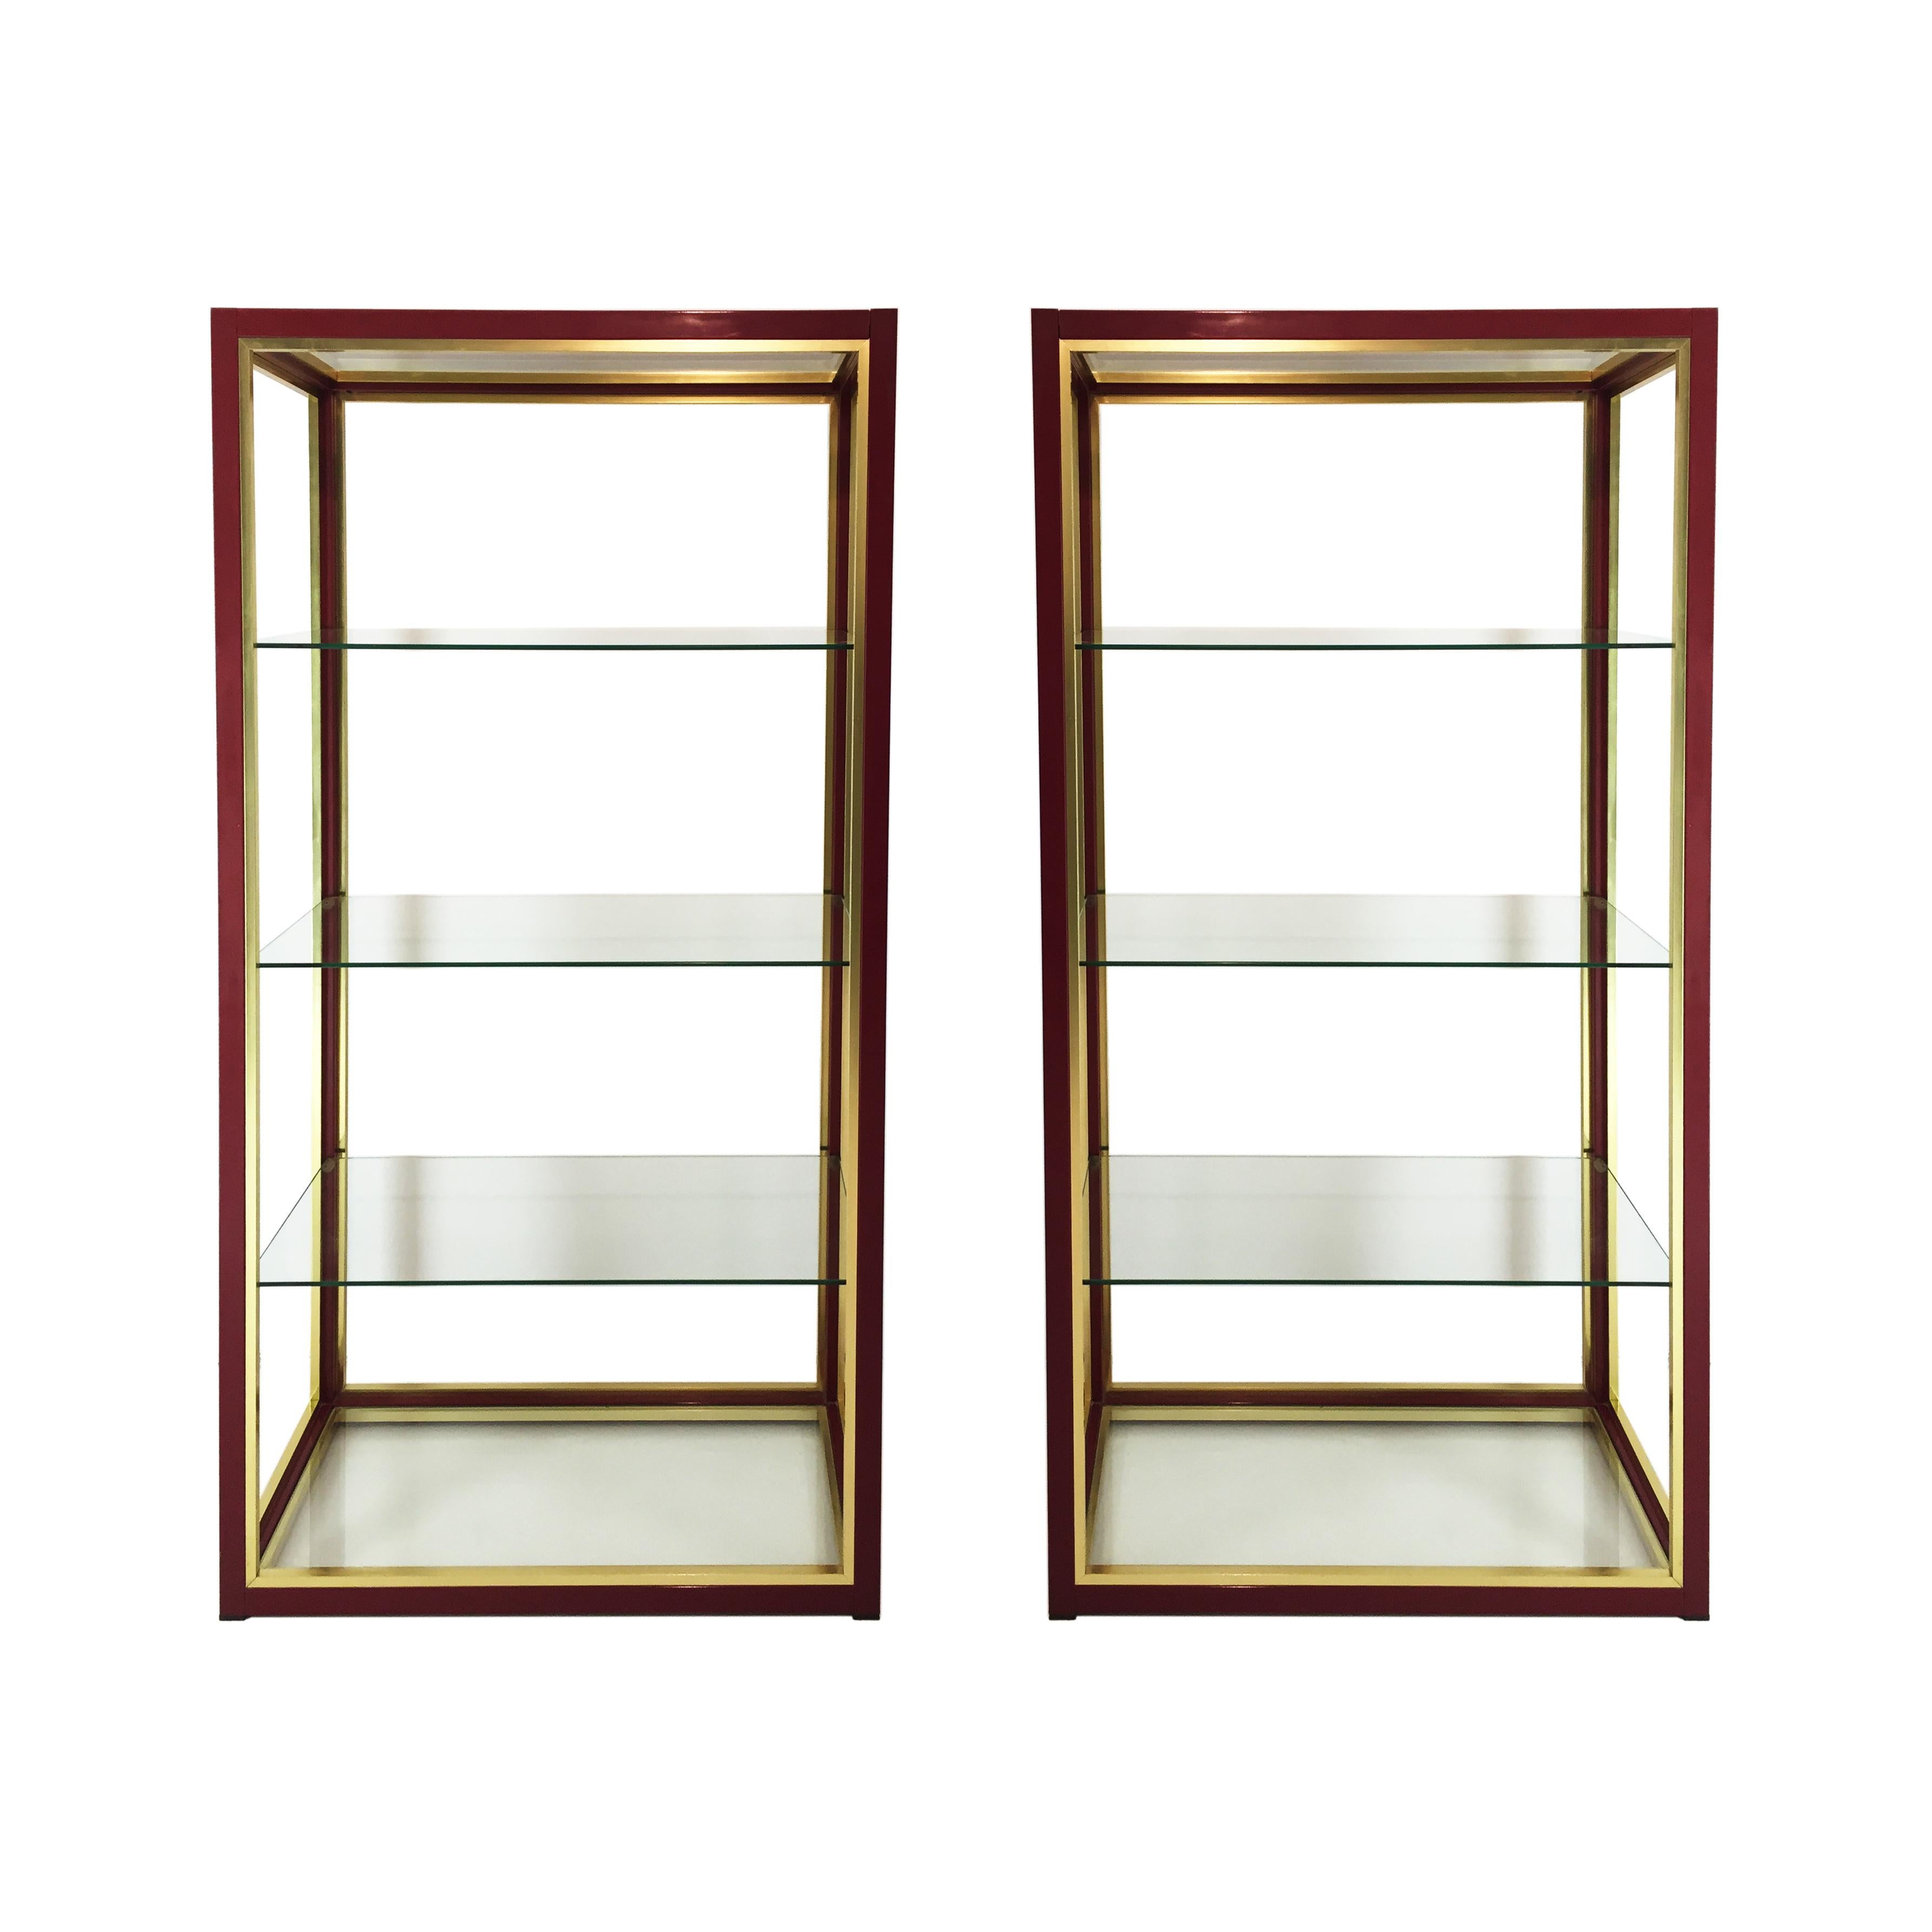 A rare pair of Renato Zevi low étagères in burgundy and gold frame with clear glass shelves. Zevi étagères usually come in chrome or gold frame, the burgundy ones are the rarest ones. Very practical and modern piece either for domestic or commercial